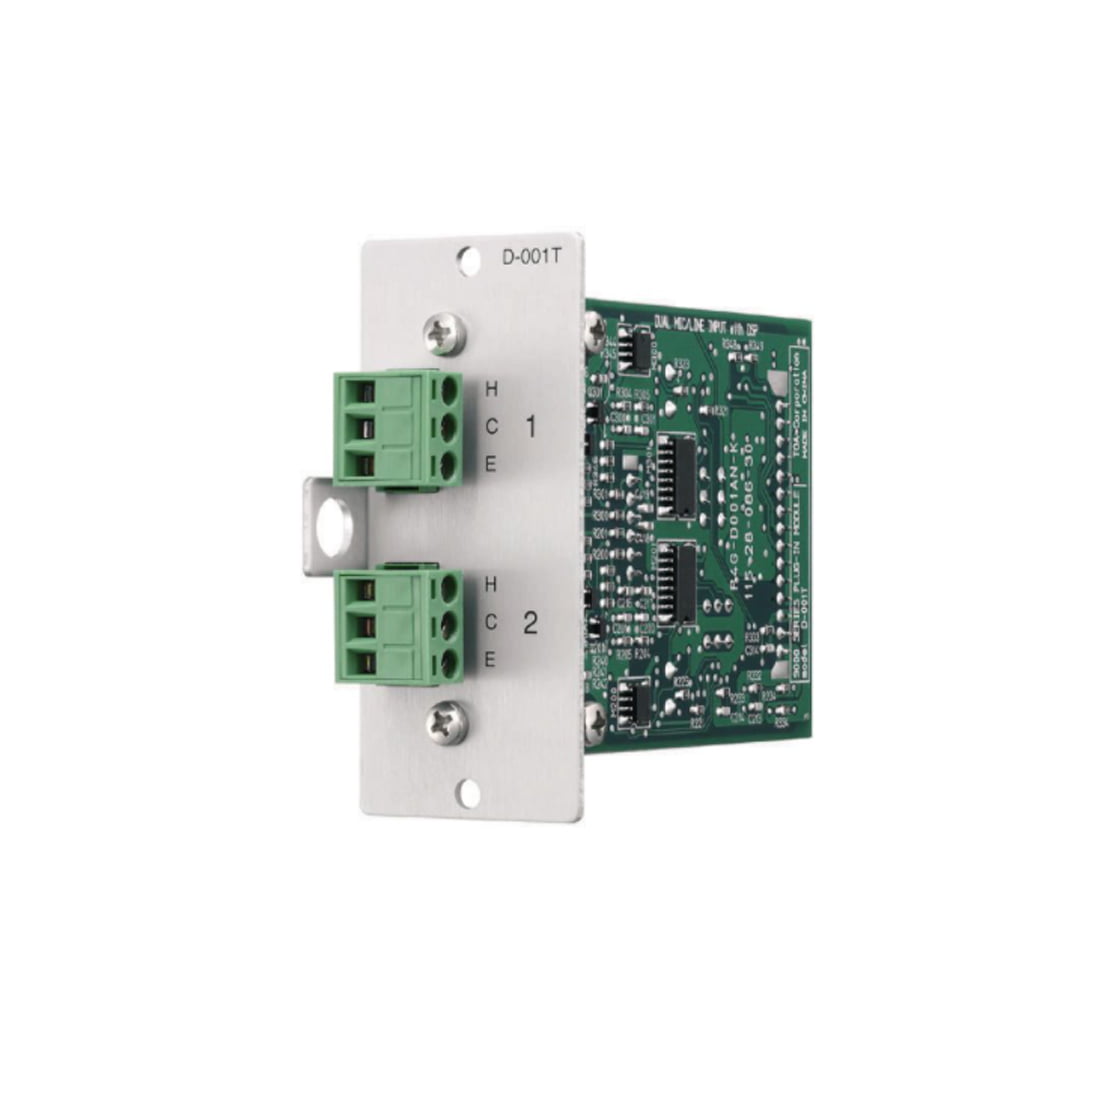 TOA D-001T Dual Mic / Line Input Module with DSP